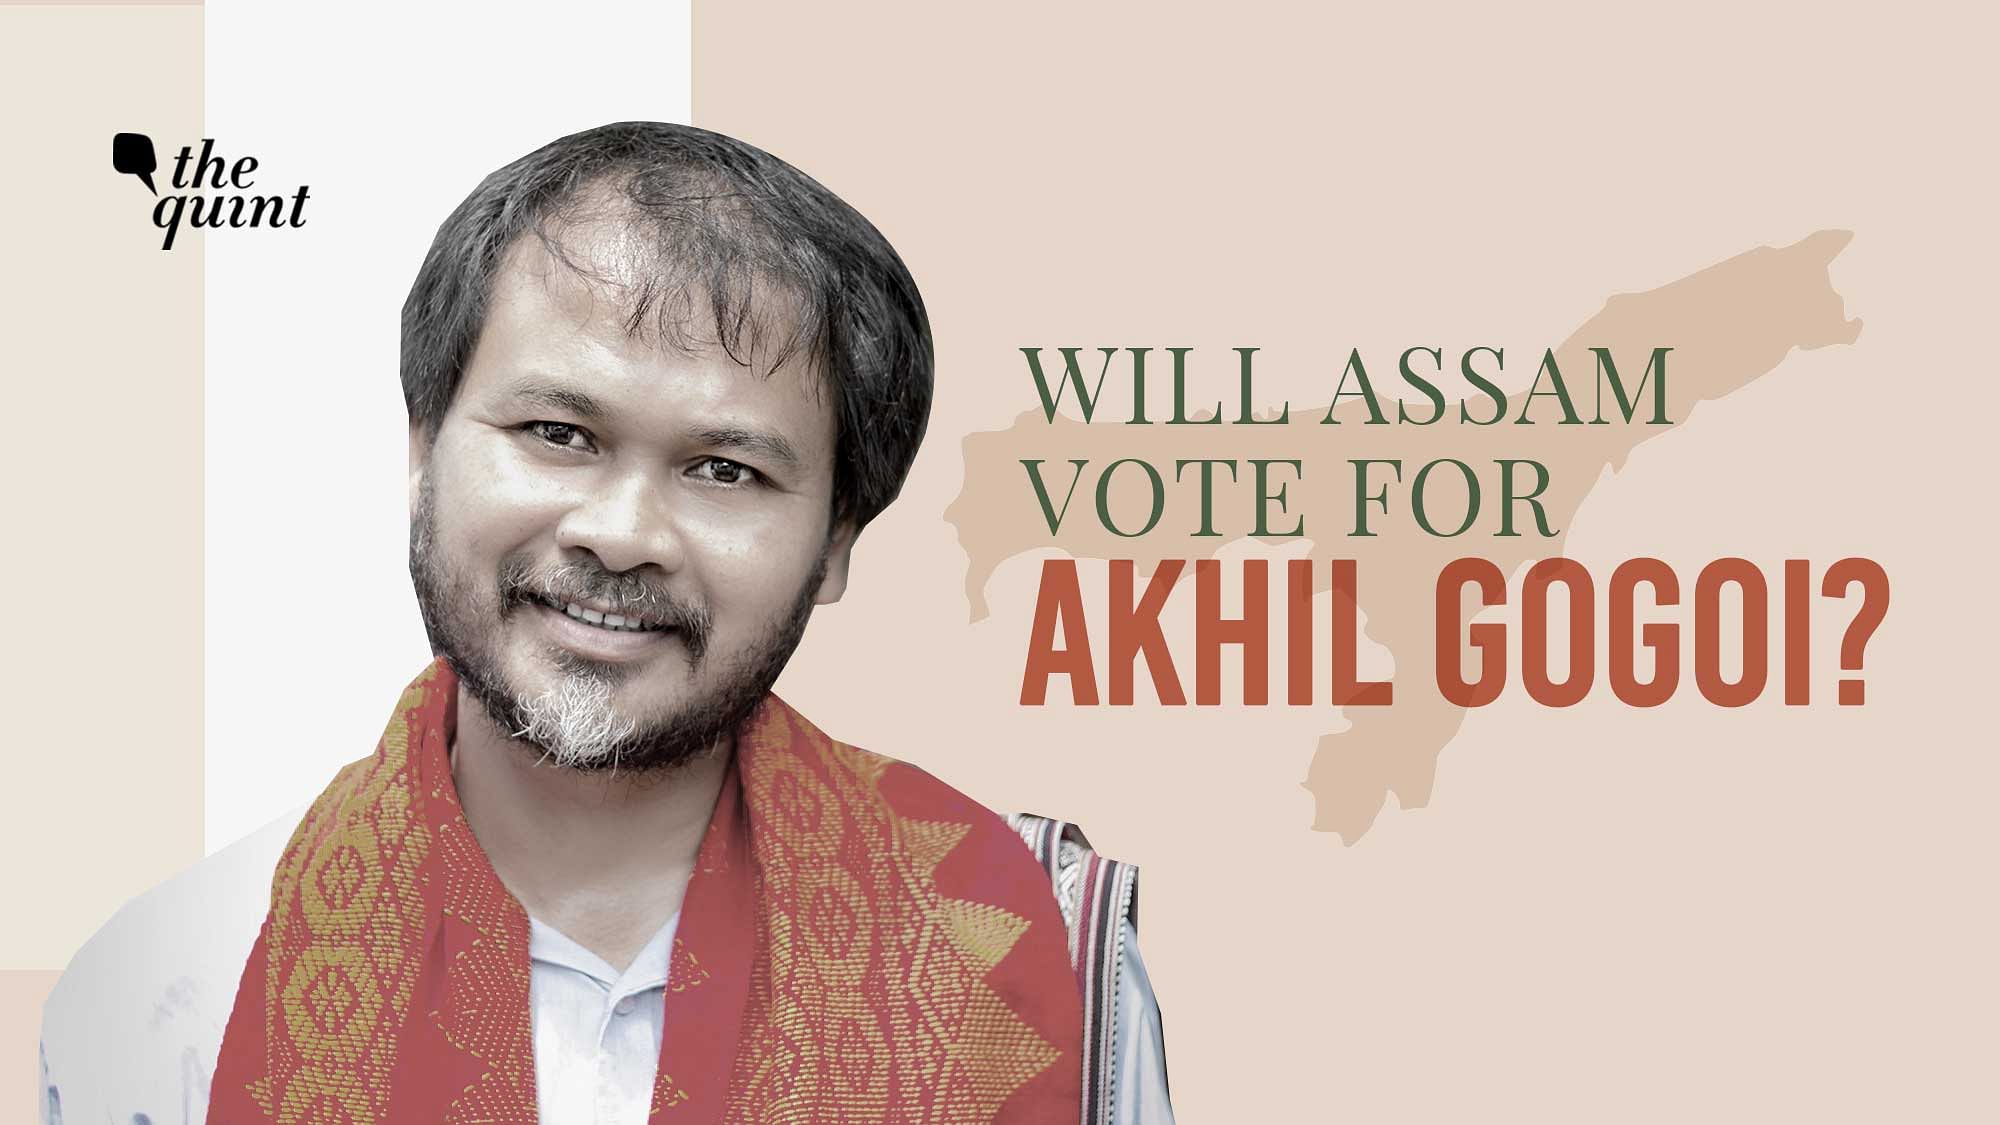 Jailed activist, Akhil Gogoi is a popular face in Assam but will his street activism get him votes?